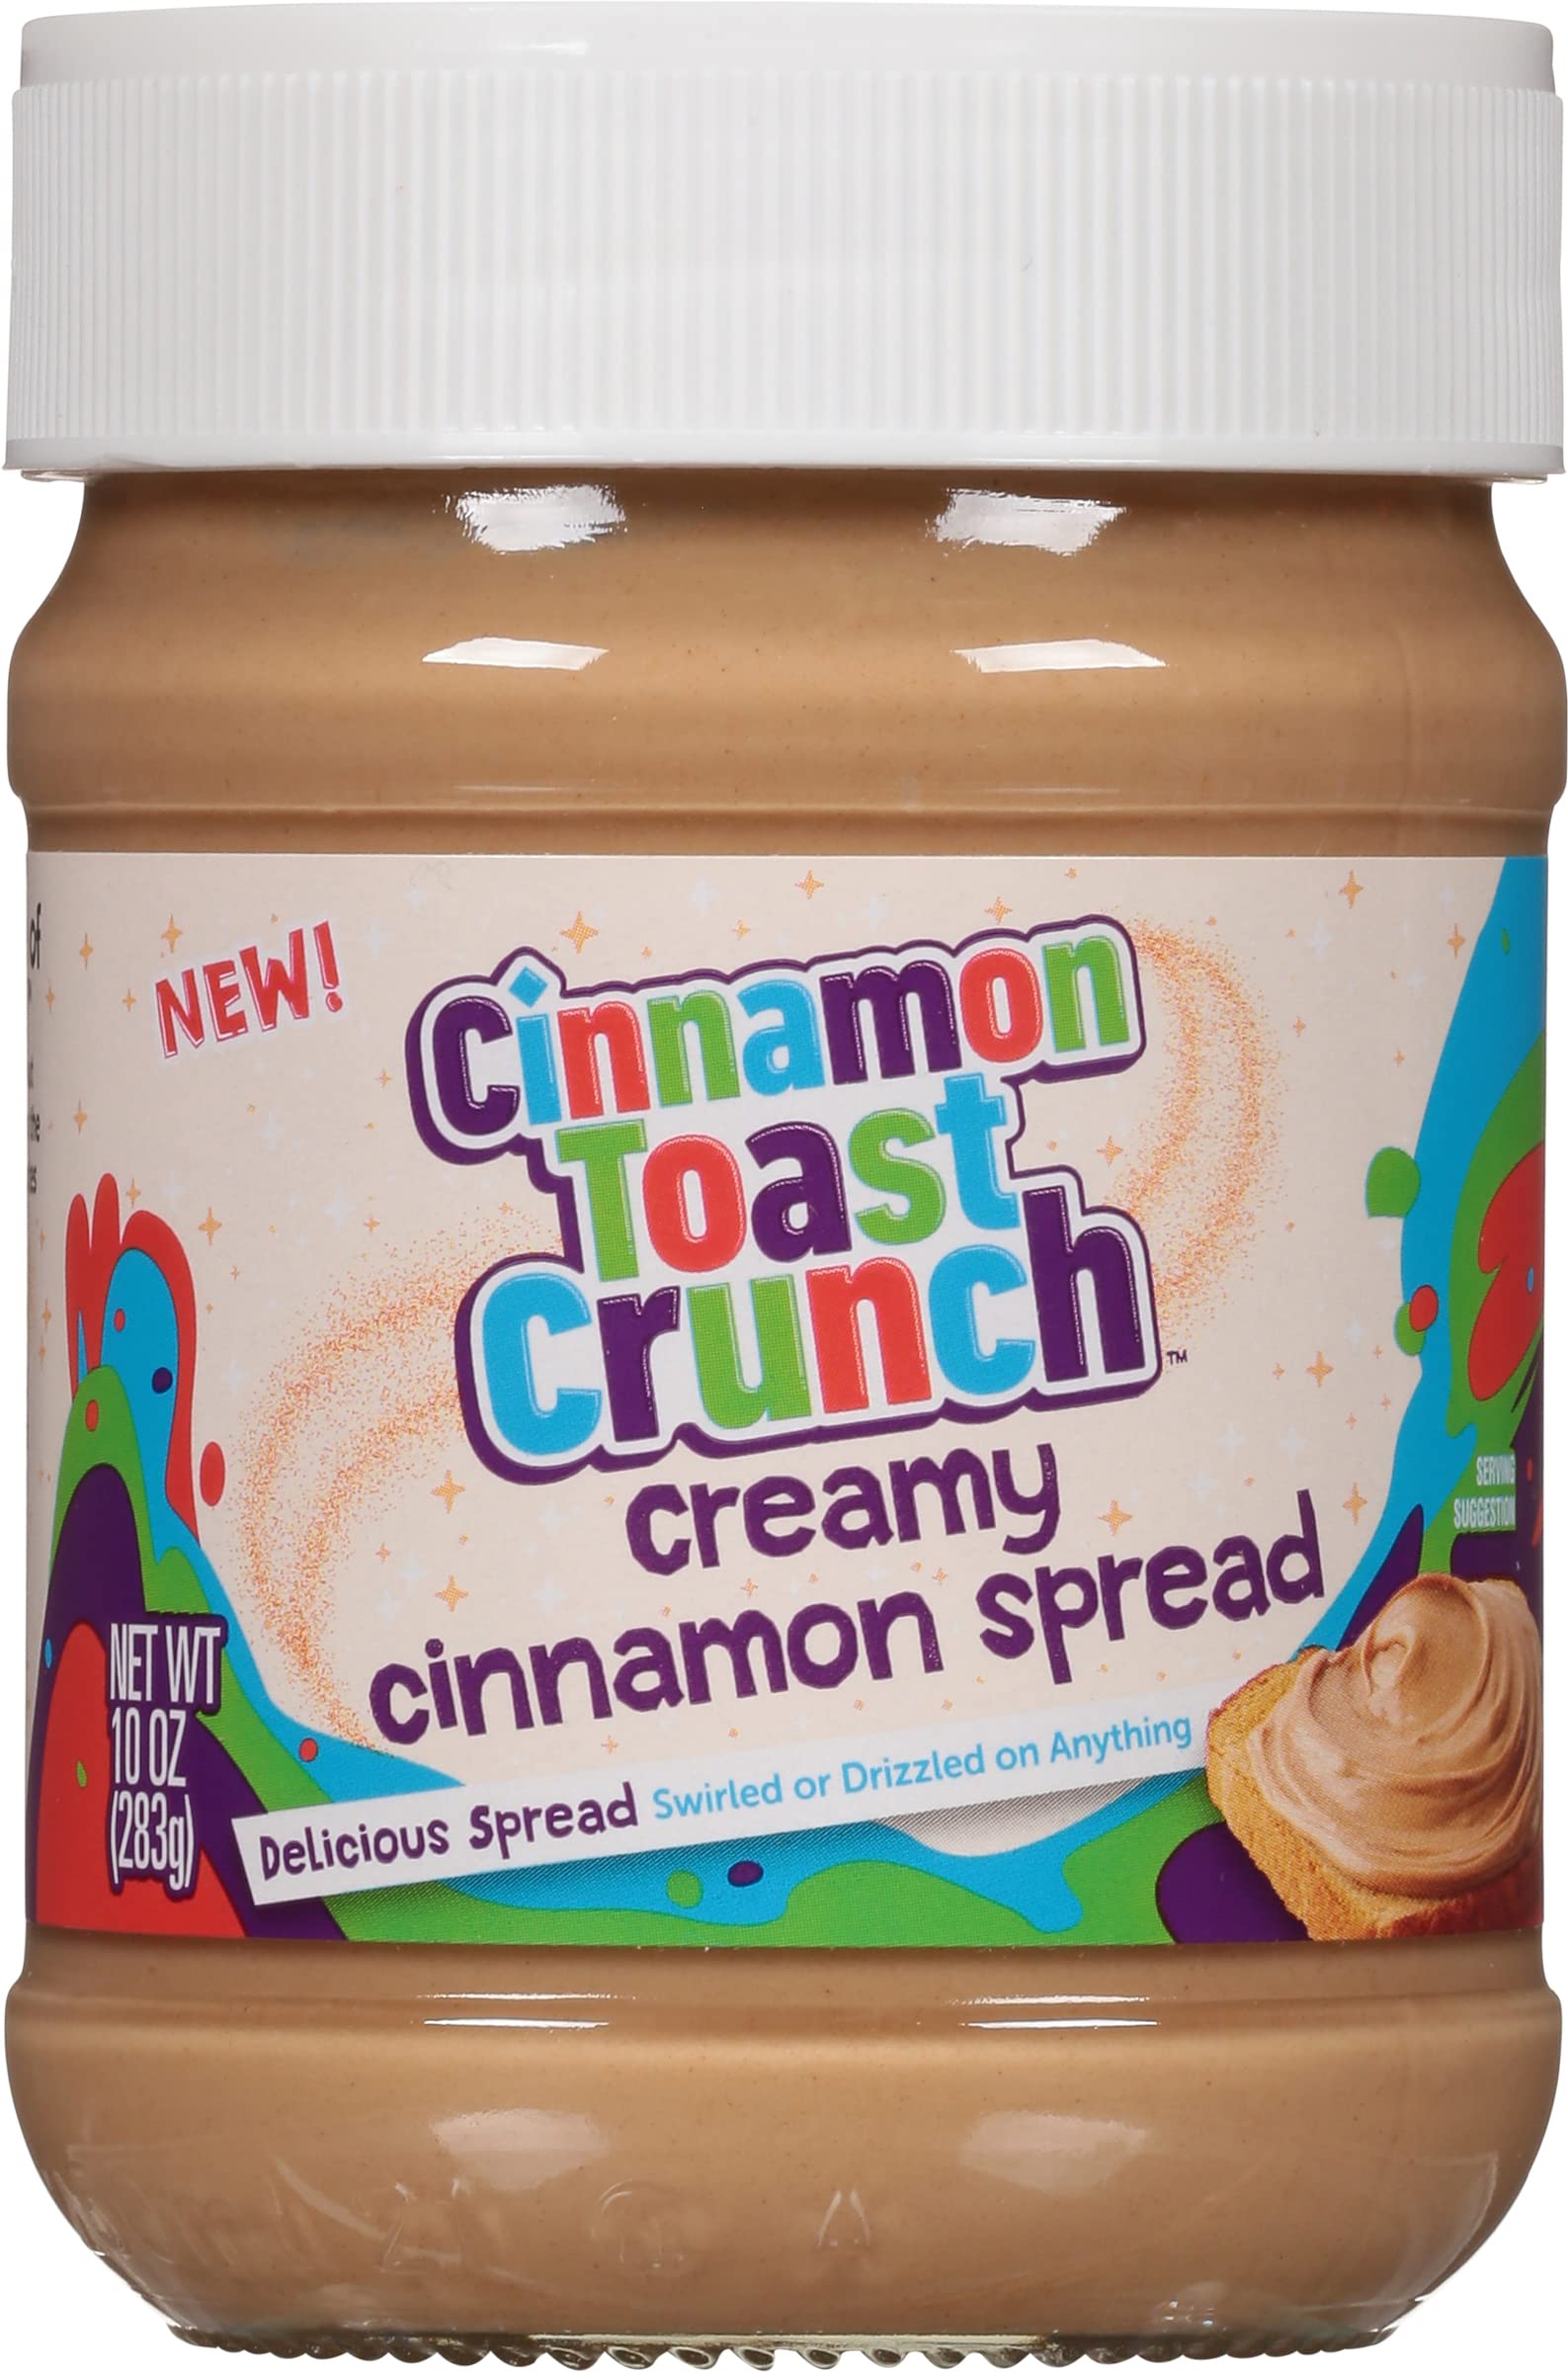 Does Cinnamon Toast Crunch Spread Need to Be Refrigerated